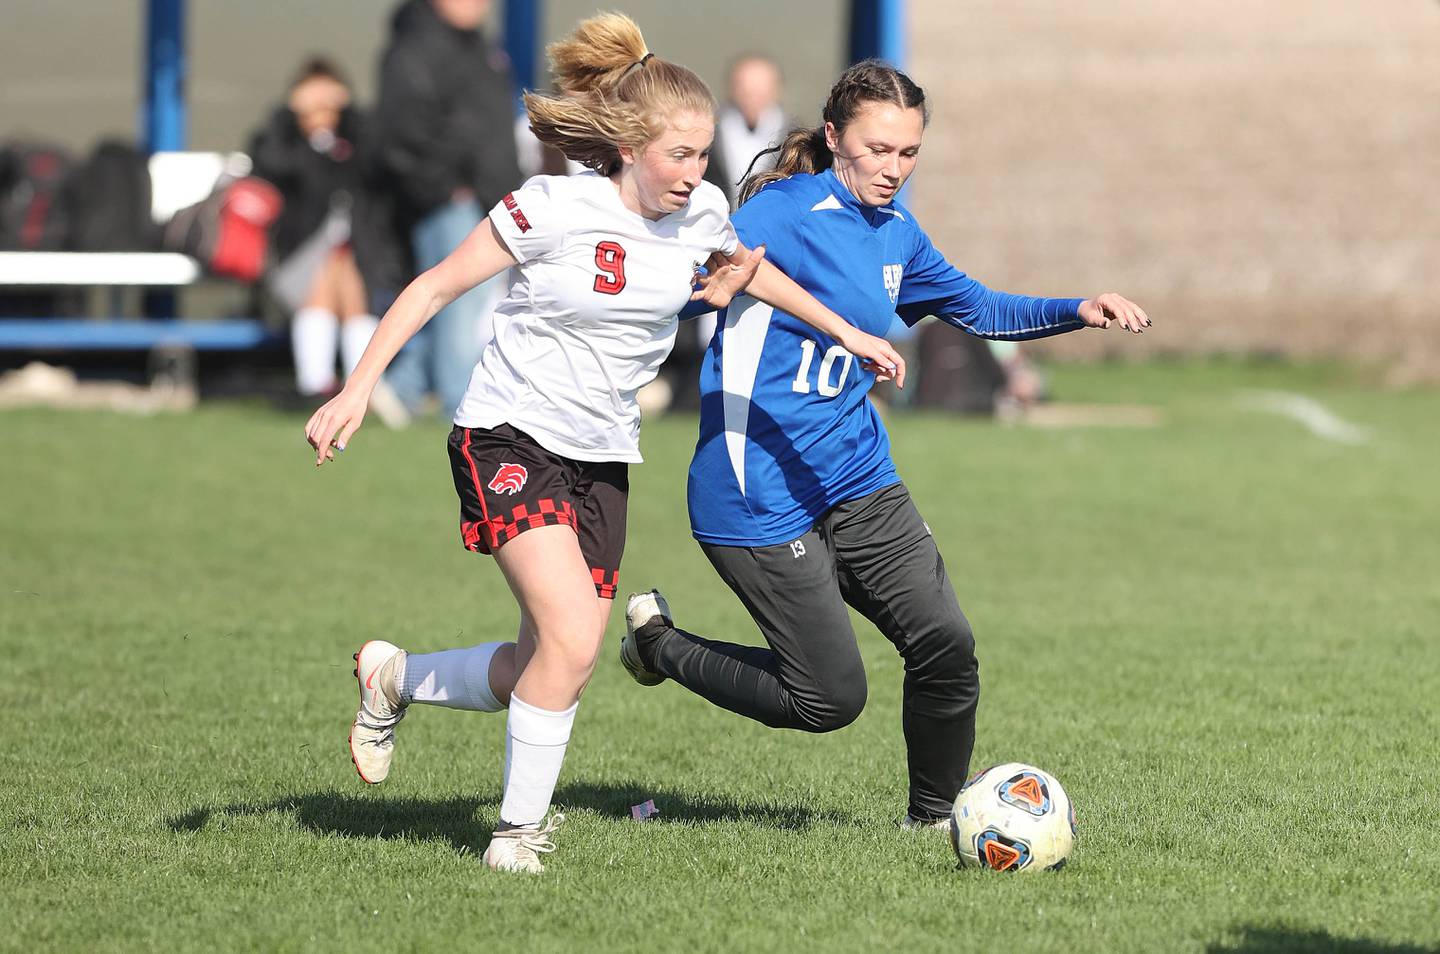 Indian Creek's Jolee Larson and Hinckley-Big Rock/Somonauk's Josie Rader try to get to the ball first during their game Tuesday, April 26, 2022, at Hinckley-Big Rock High School.